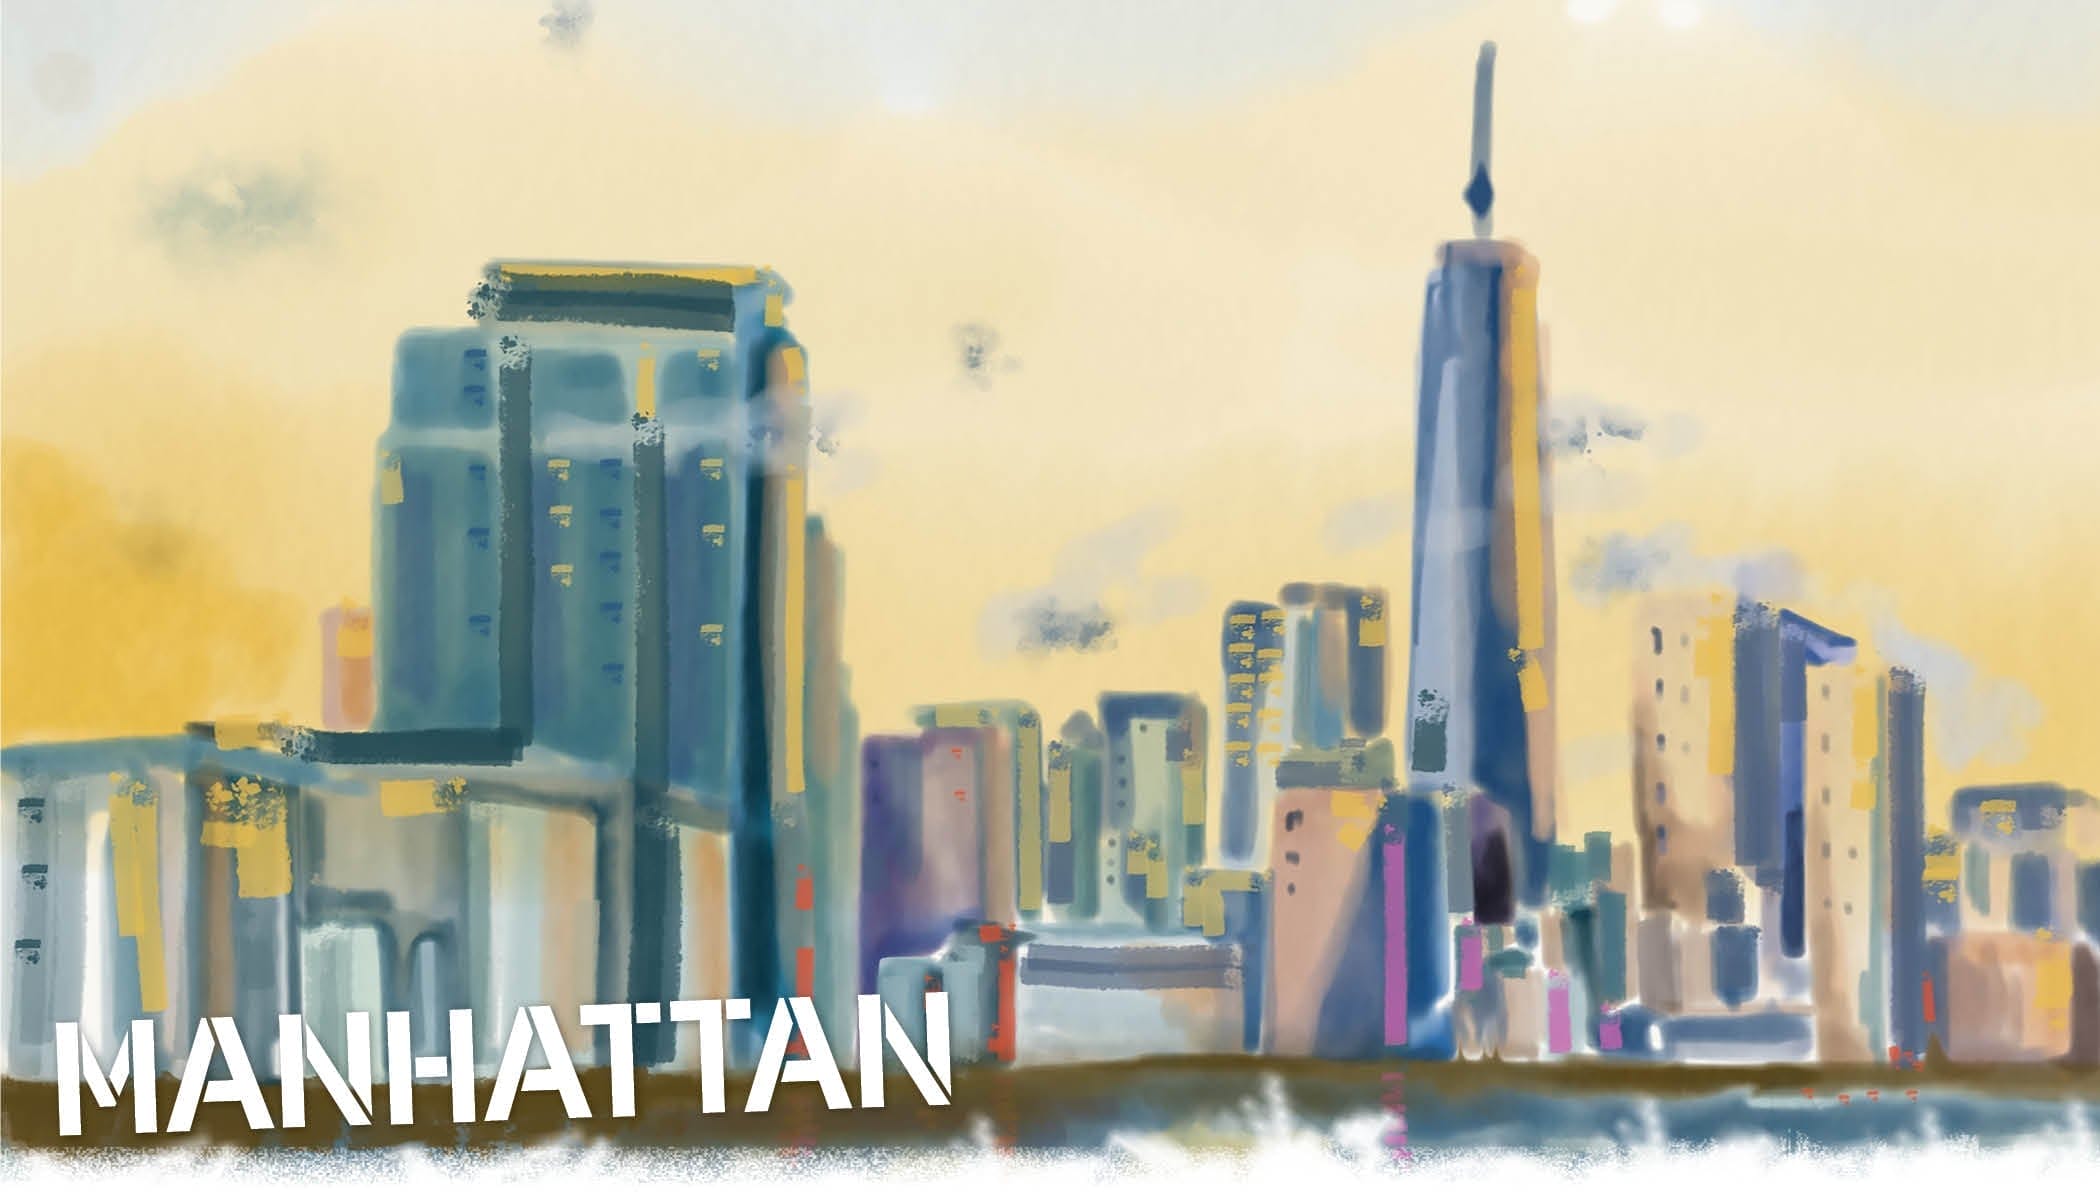 Manhattan Skyline is unlike any other